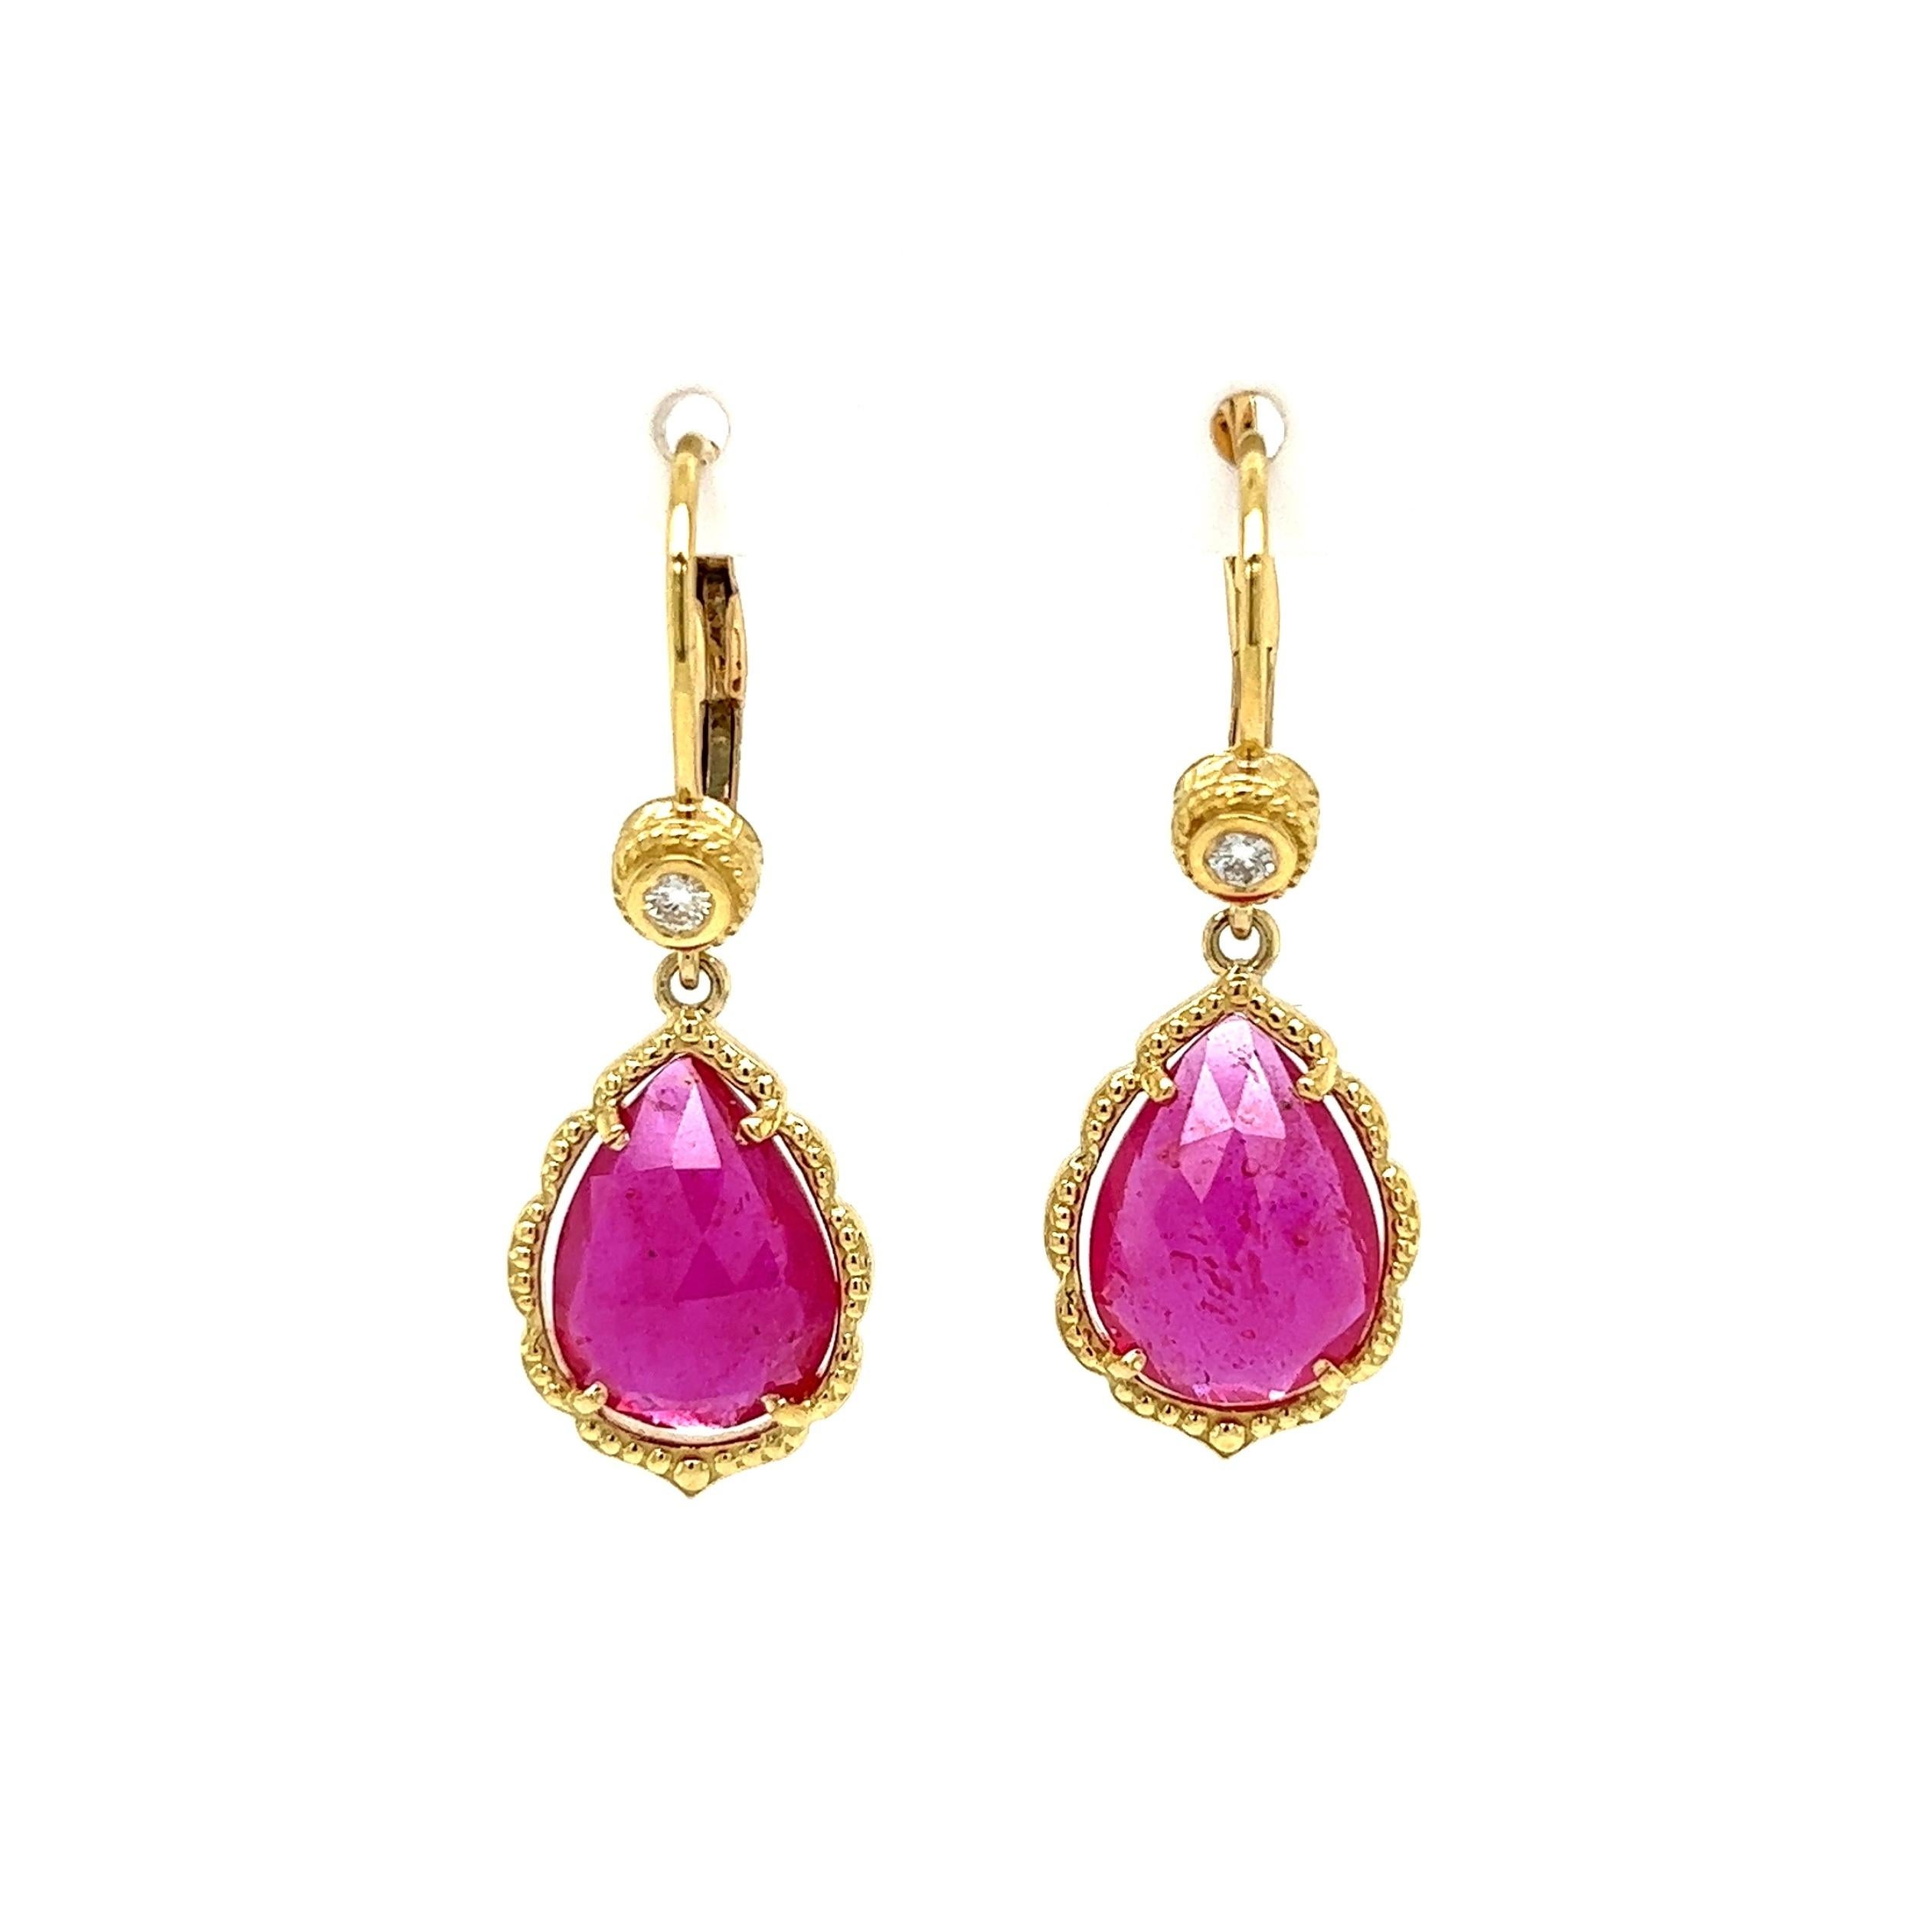 Simply Beautiful! Pink Sapphire and Diamond Gold Drop Earrings by Designer PENNY PREVILLE. Each earring centering a securely Hand set Pink Sapphire, approx.7.68tcw. of 2 Sapphires. Surrounded by Diamonds weighing approx. 0.08tcw. Hand crafted 18K